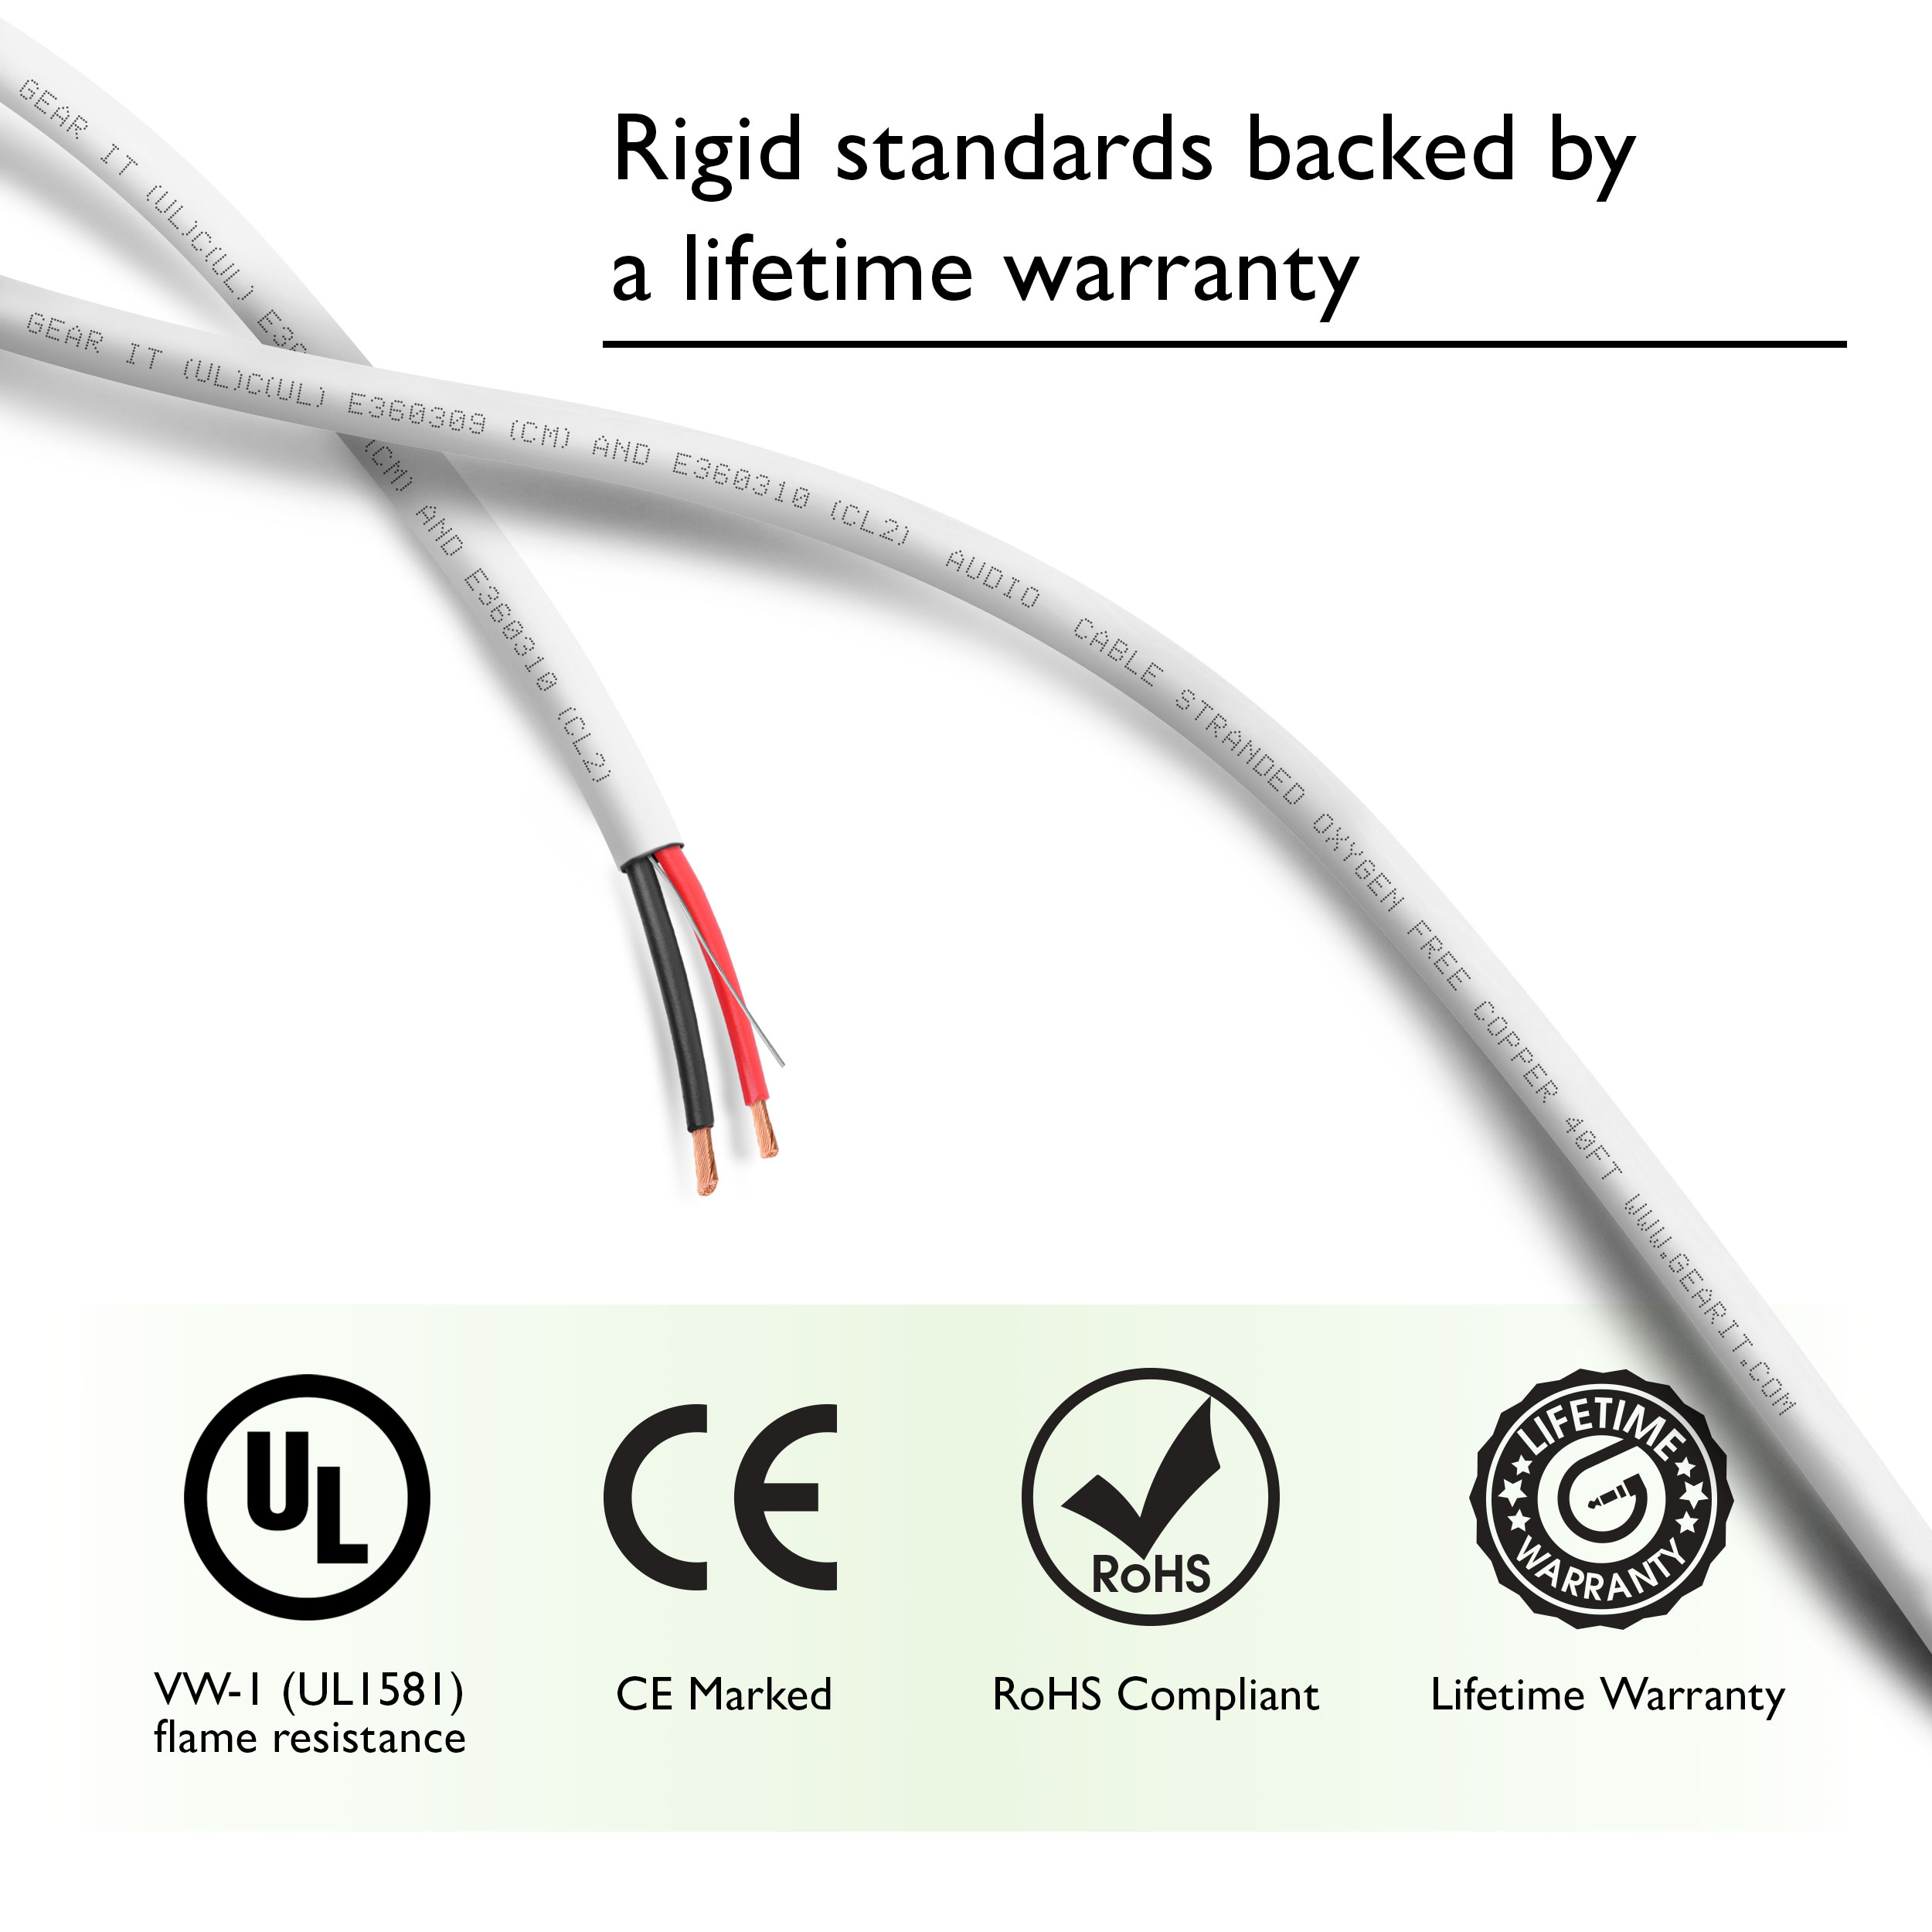 16 AWG CL2 Rated OFC Speaker Wire, GearIT Pro Series 16 Gauge OFC Oxygen Free Copper UL CL2 Rated for In-Wall Speaker Wire Cable - image 5 of 6